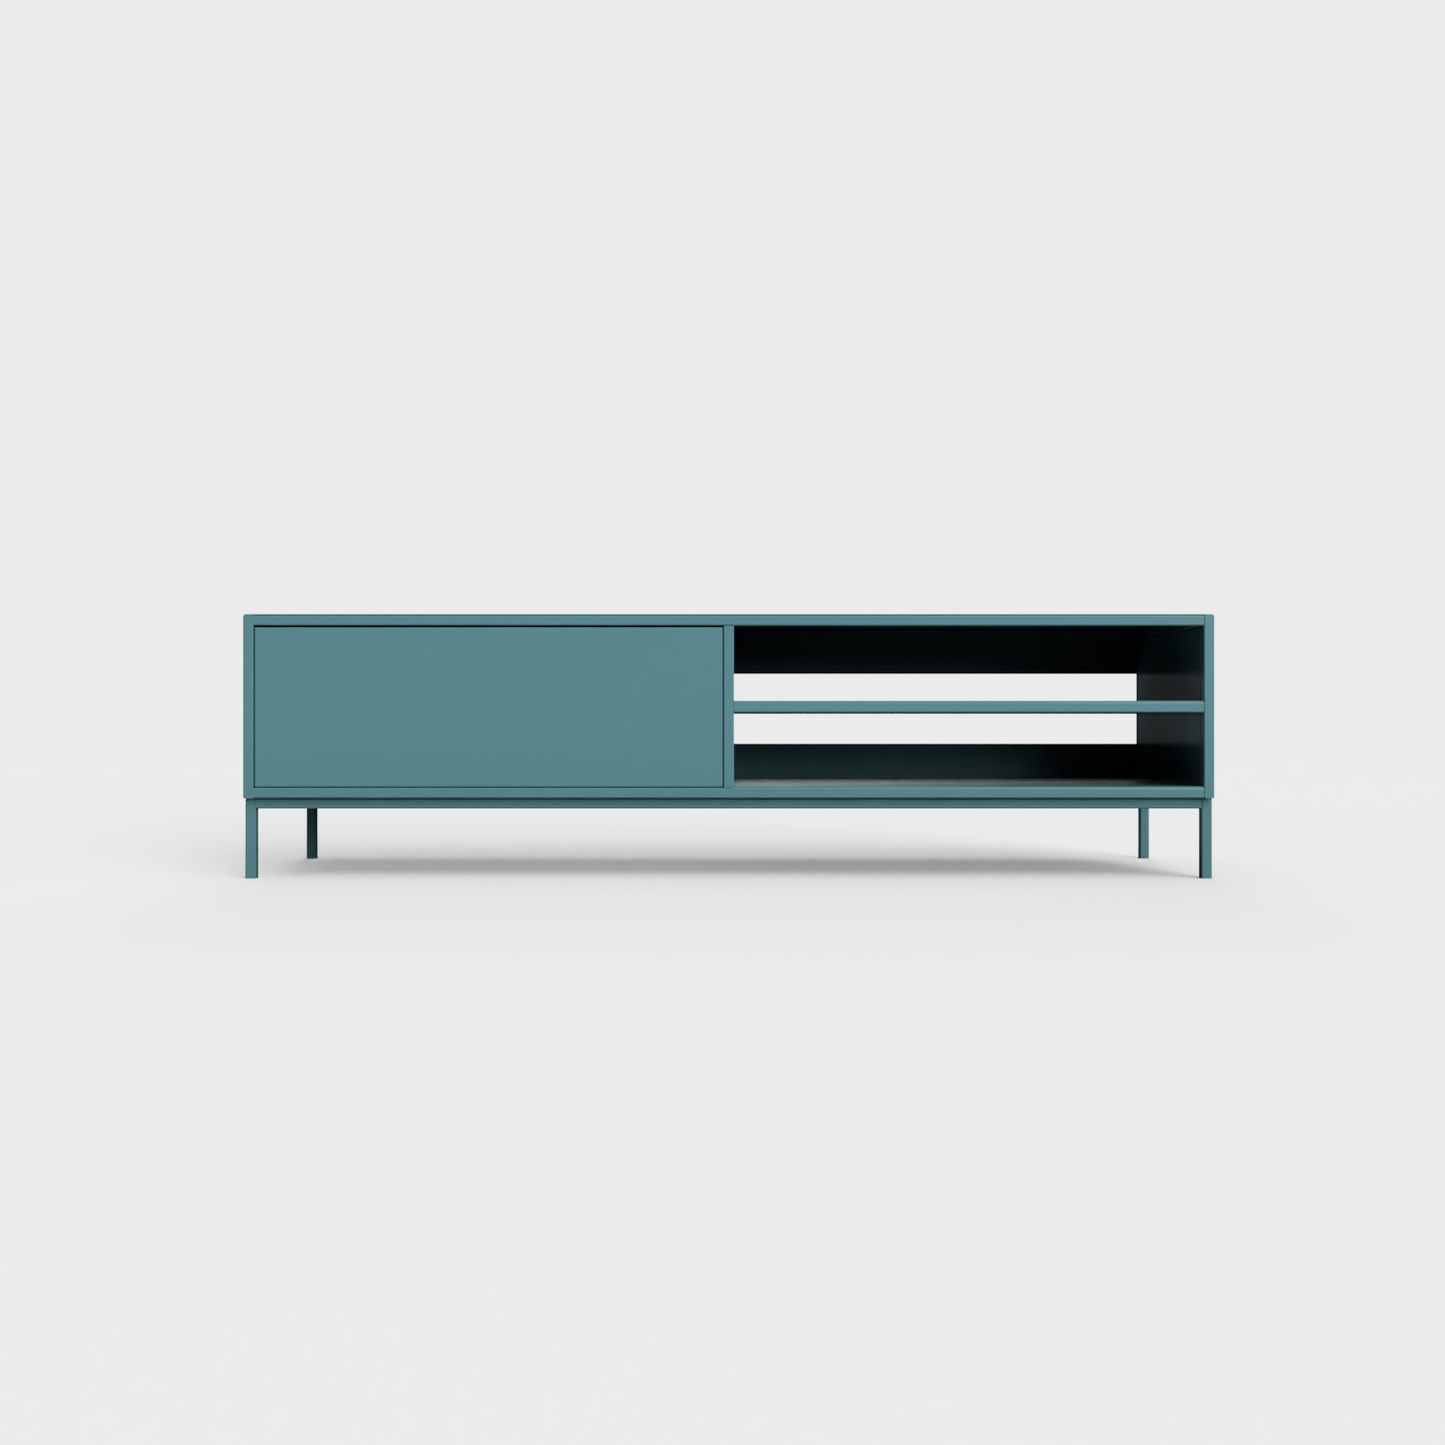 Prunus 02 Lowboard in Turquoise color, powder-coated steel, elegant and modern piece of furniture for your living room